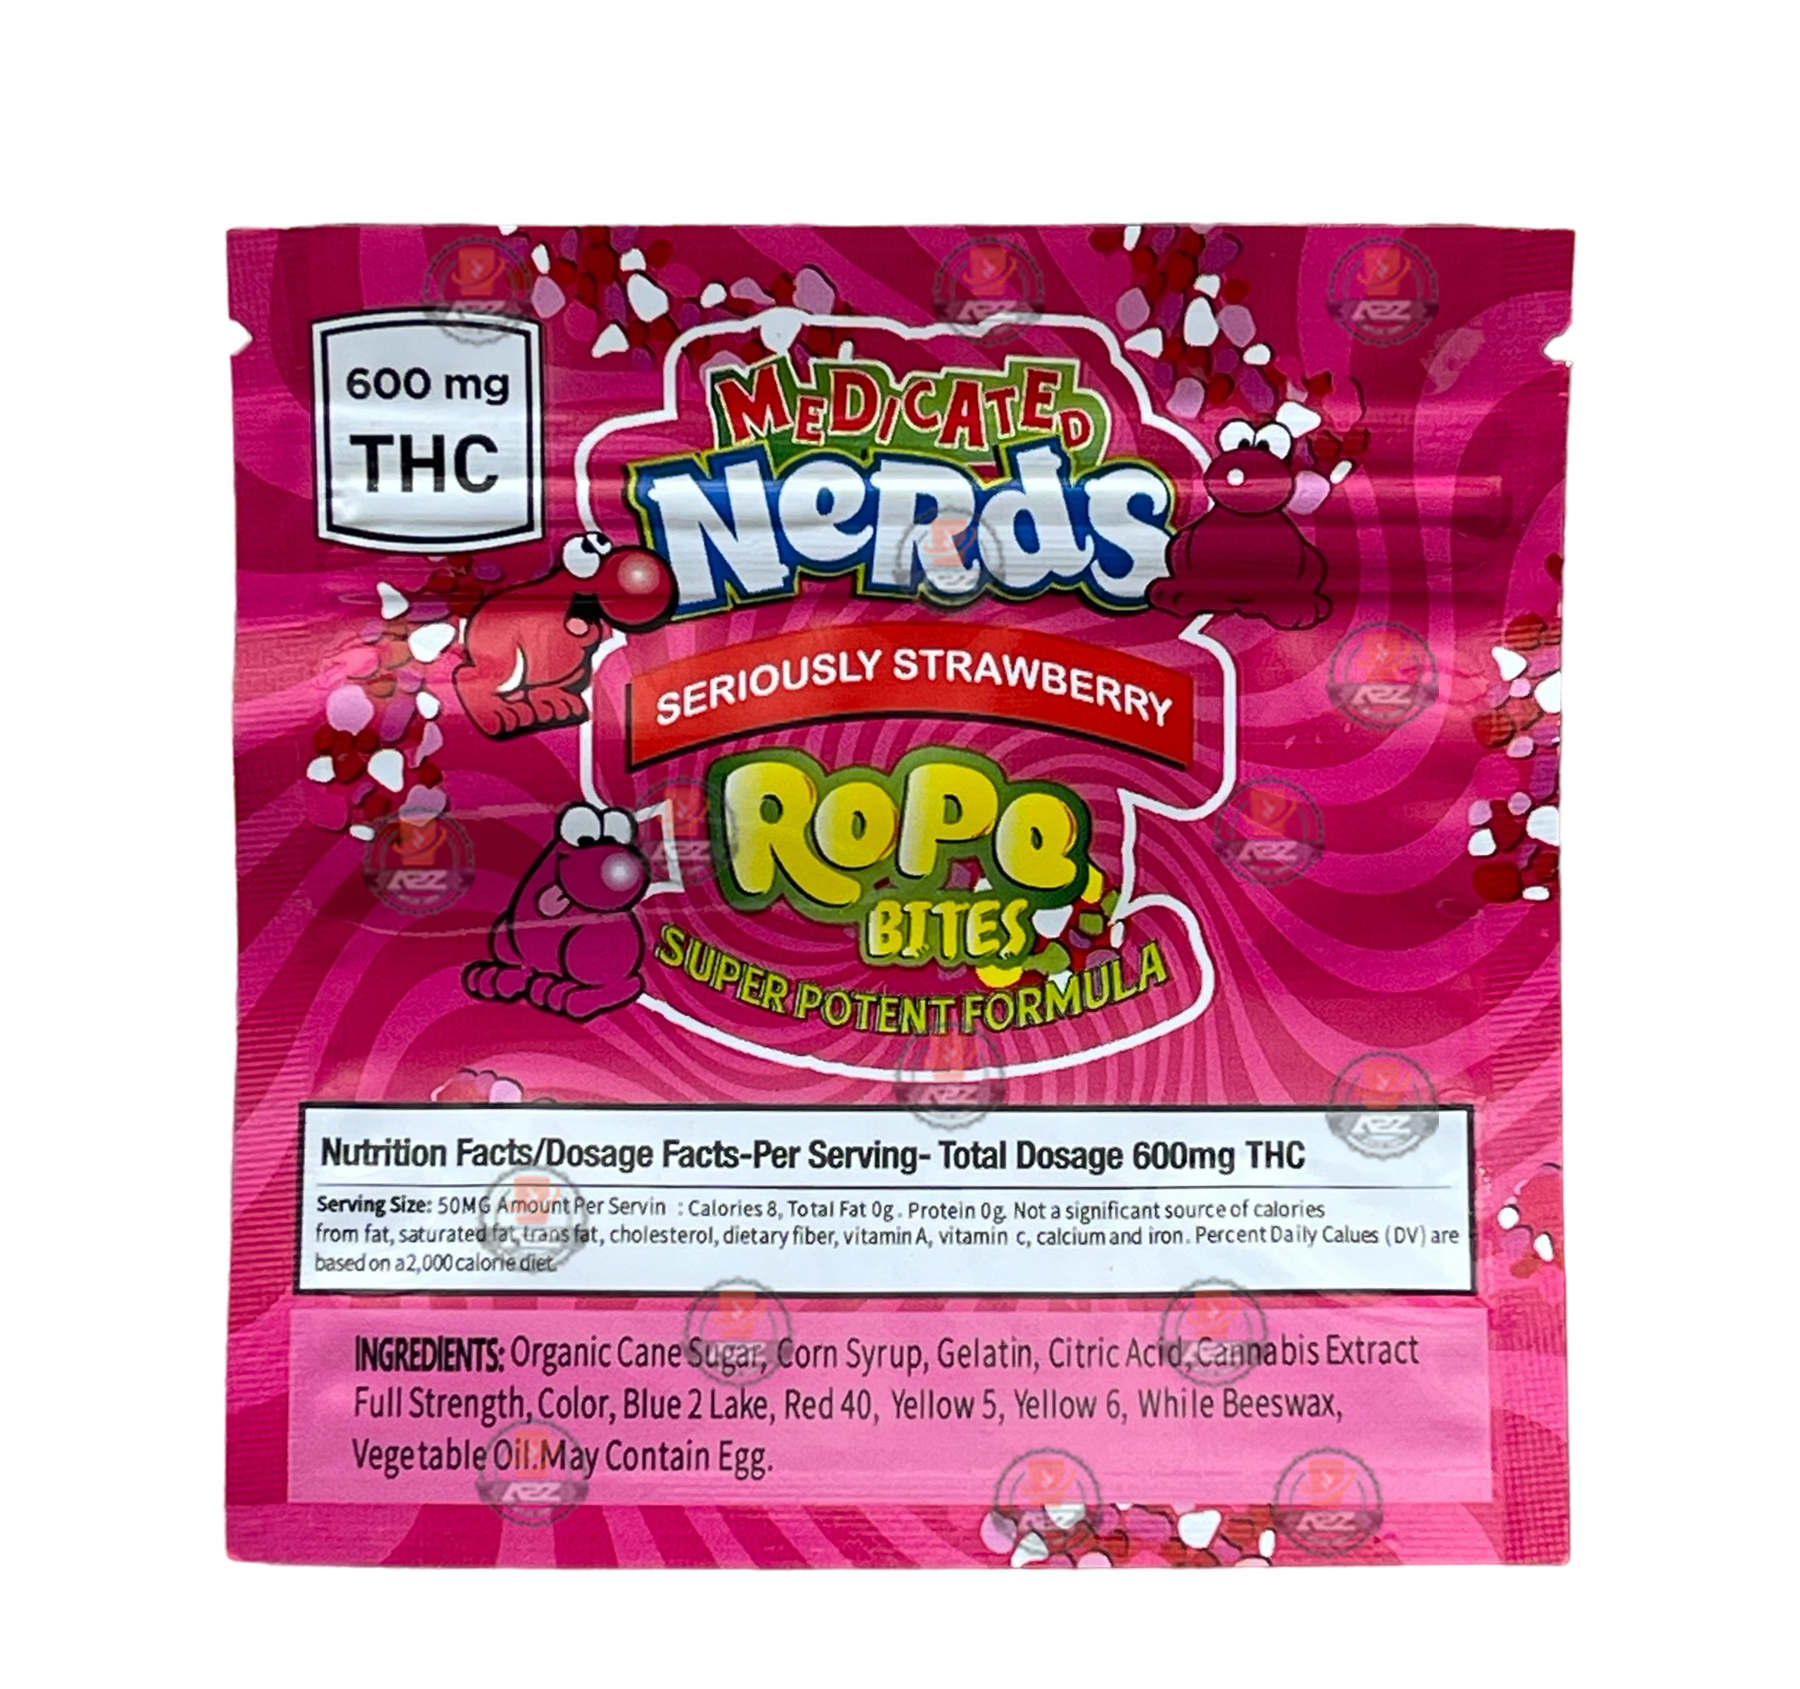 Nerds Rope Bites 600mg Mylar Bag Seriously Strawberry Packaging Only